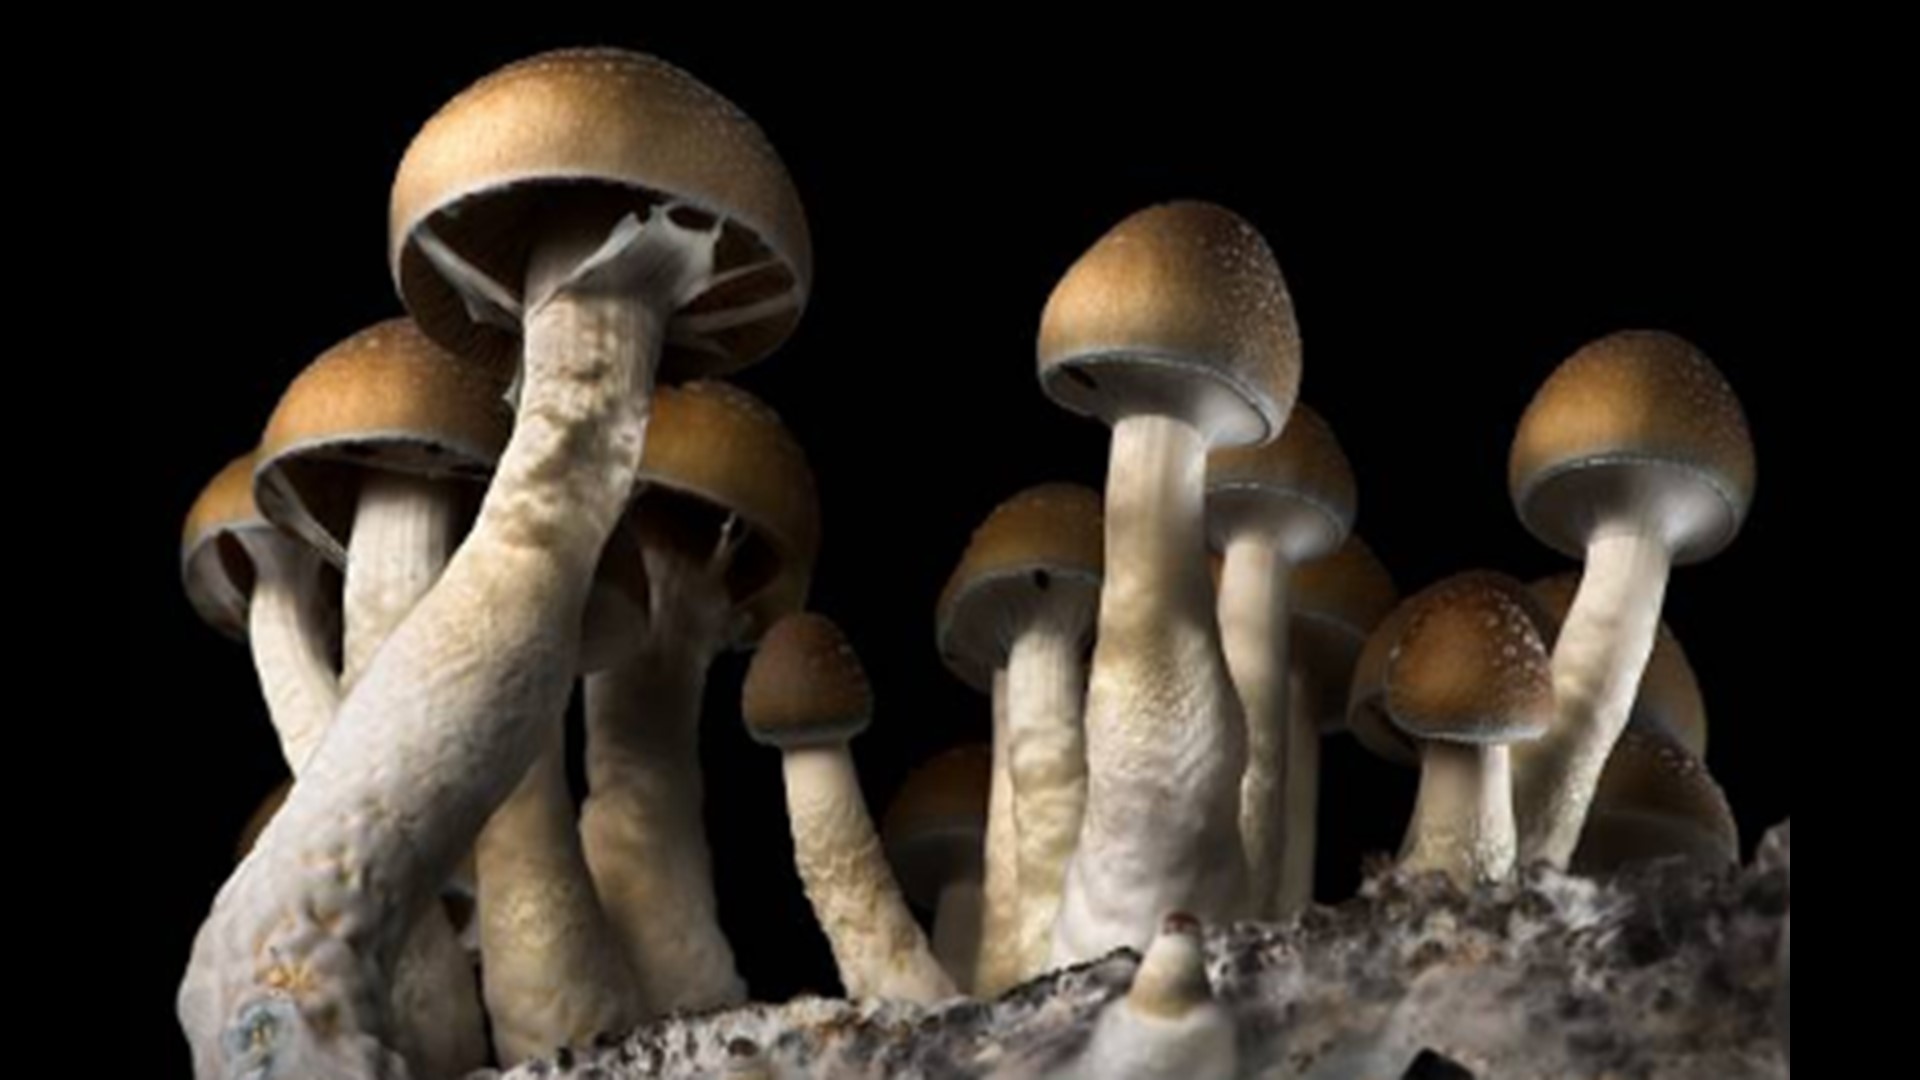 Denver will become the first city in the country to decriminalize the use of psilocybin mushrooms.